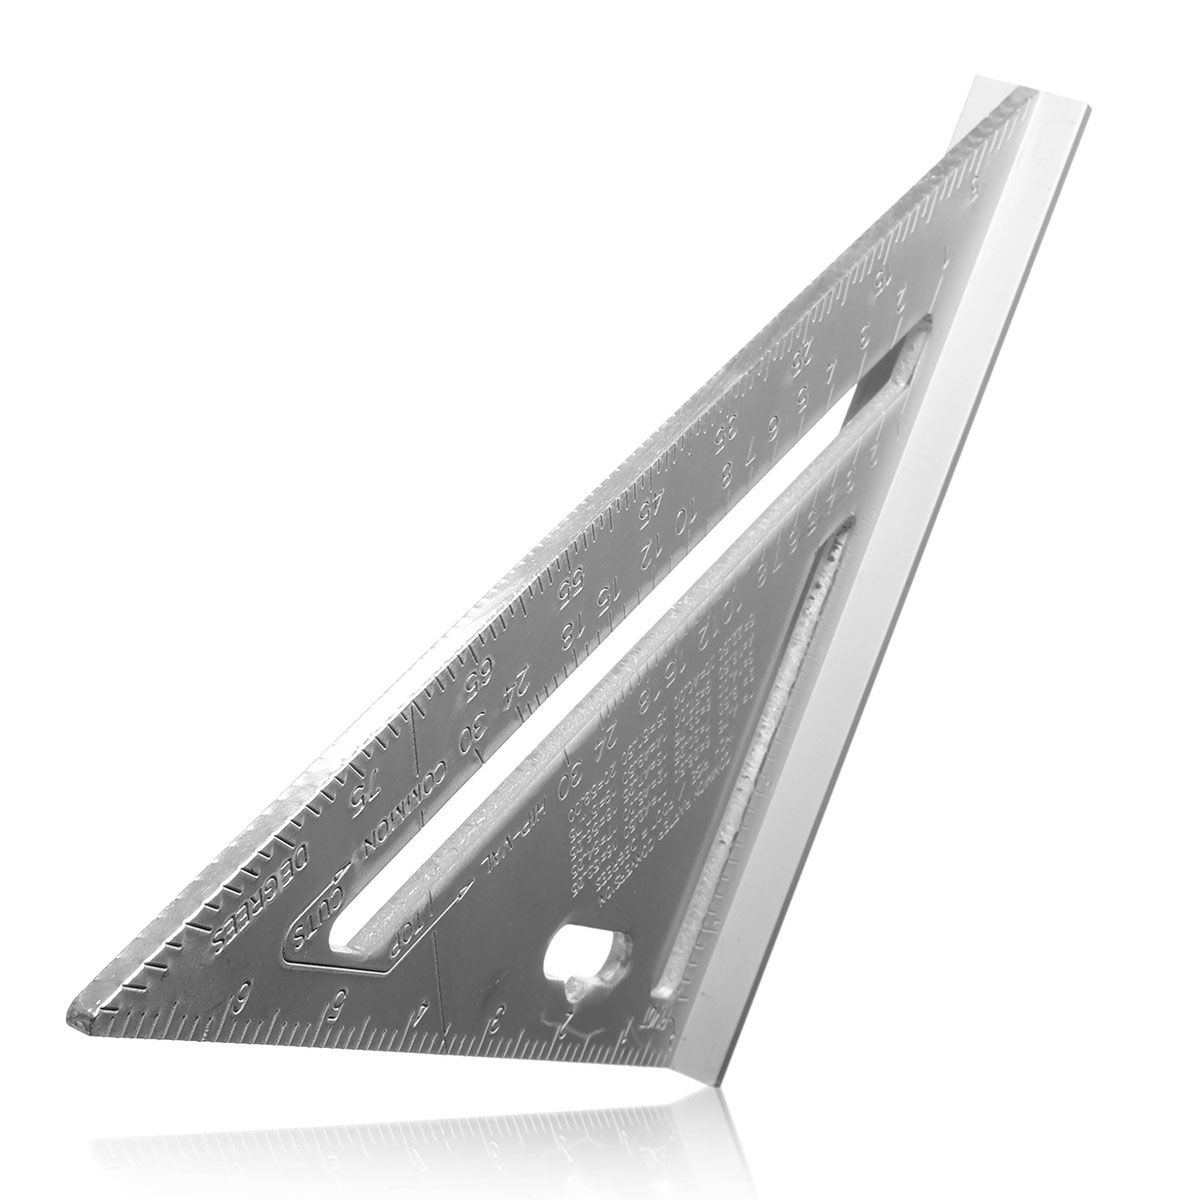 7inch-Silver-Aluminum-Alloy-Speed-Square-Roofing-Triangle-Angle-Protractor-Try-Square-Carpenters-Mea-1023356